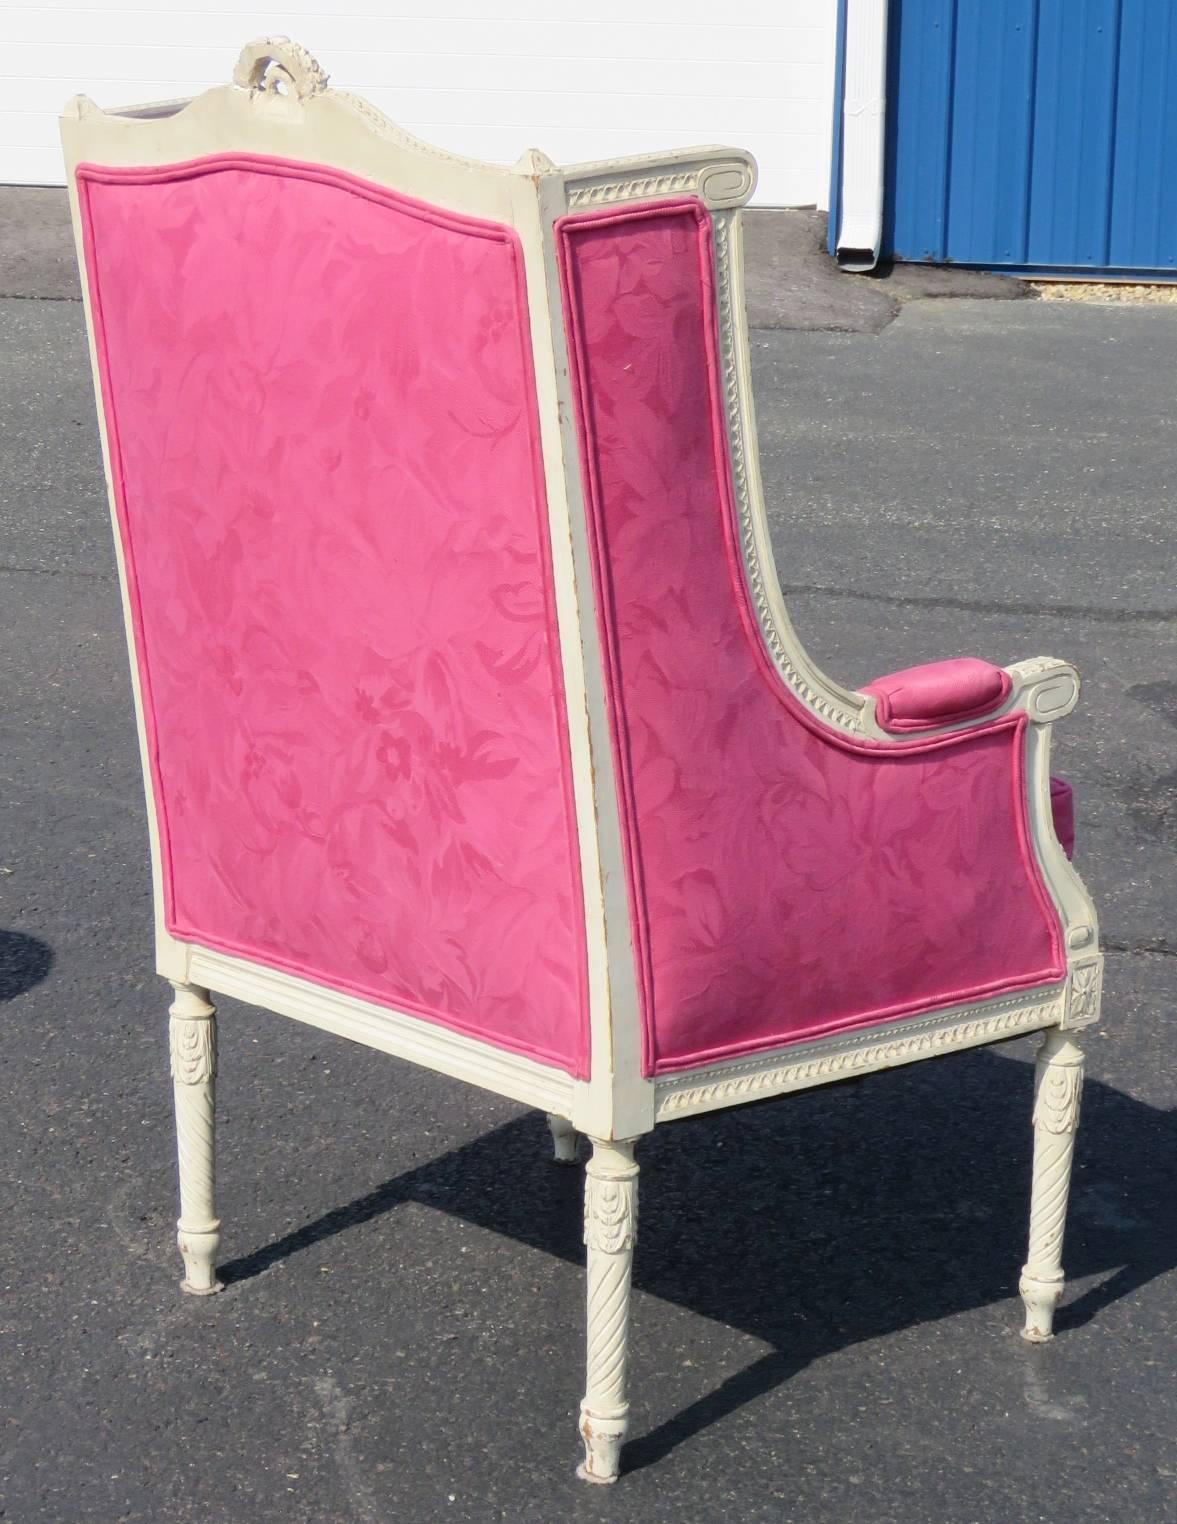 Distressed cream painted carved frame. Pink floral upholstery.